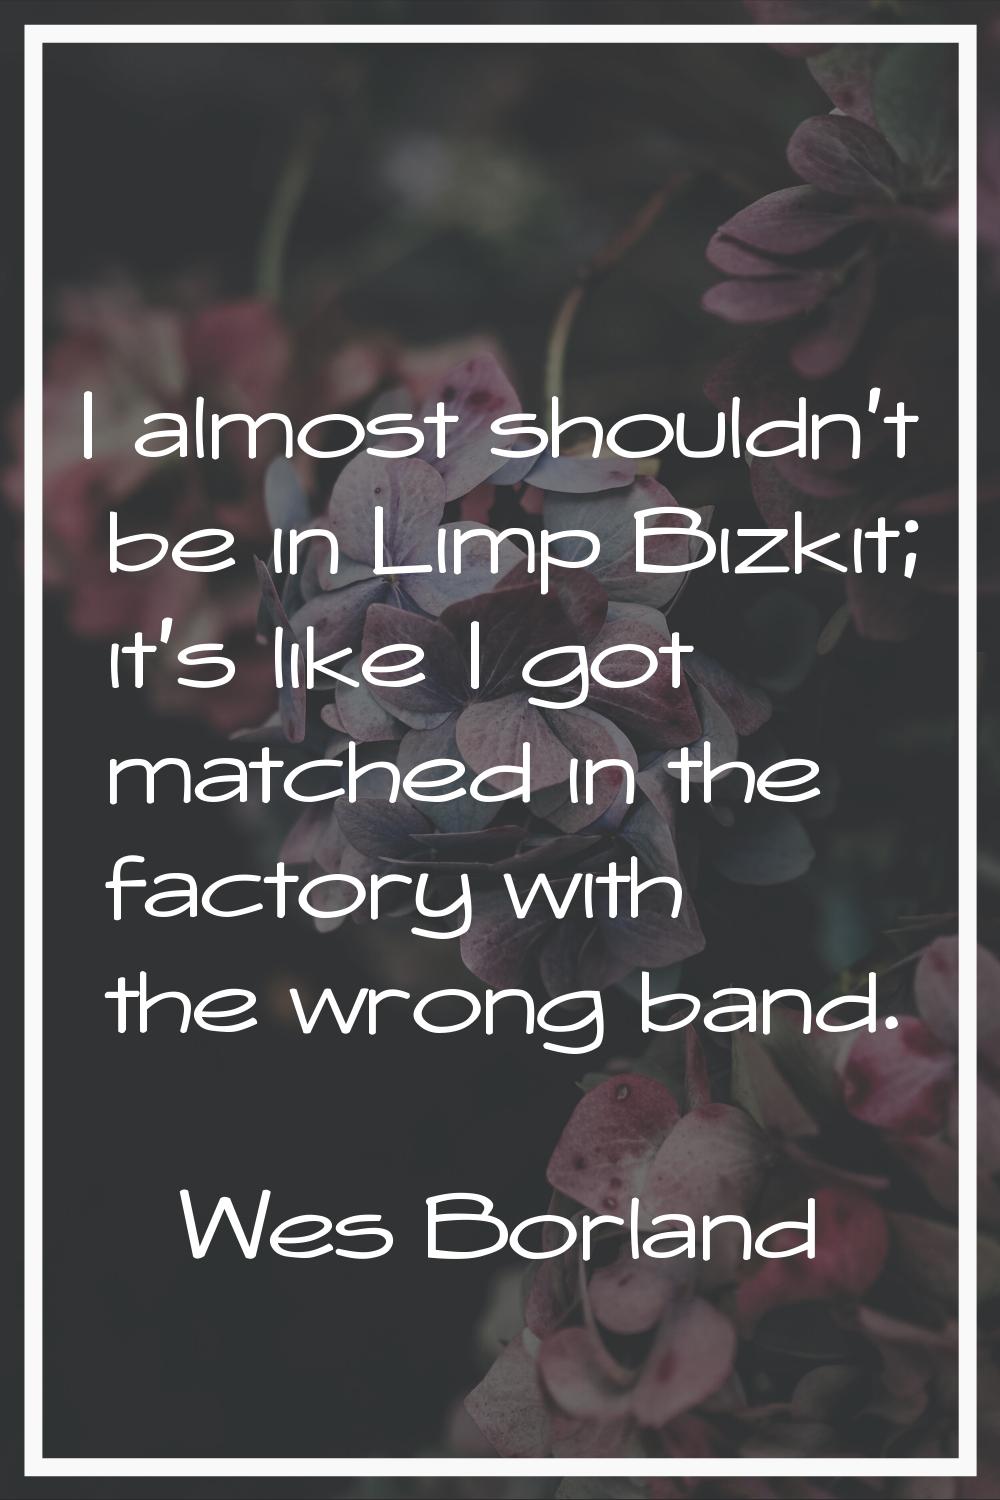 I almost shouldn't be in Limp Bizkit; it's like I got matched in the factory with the wrong band.